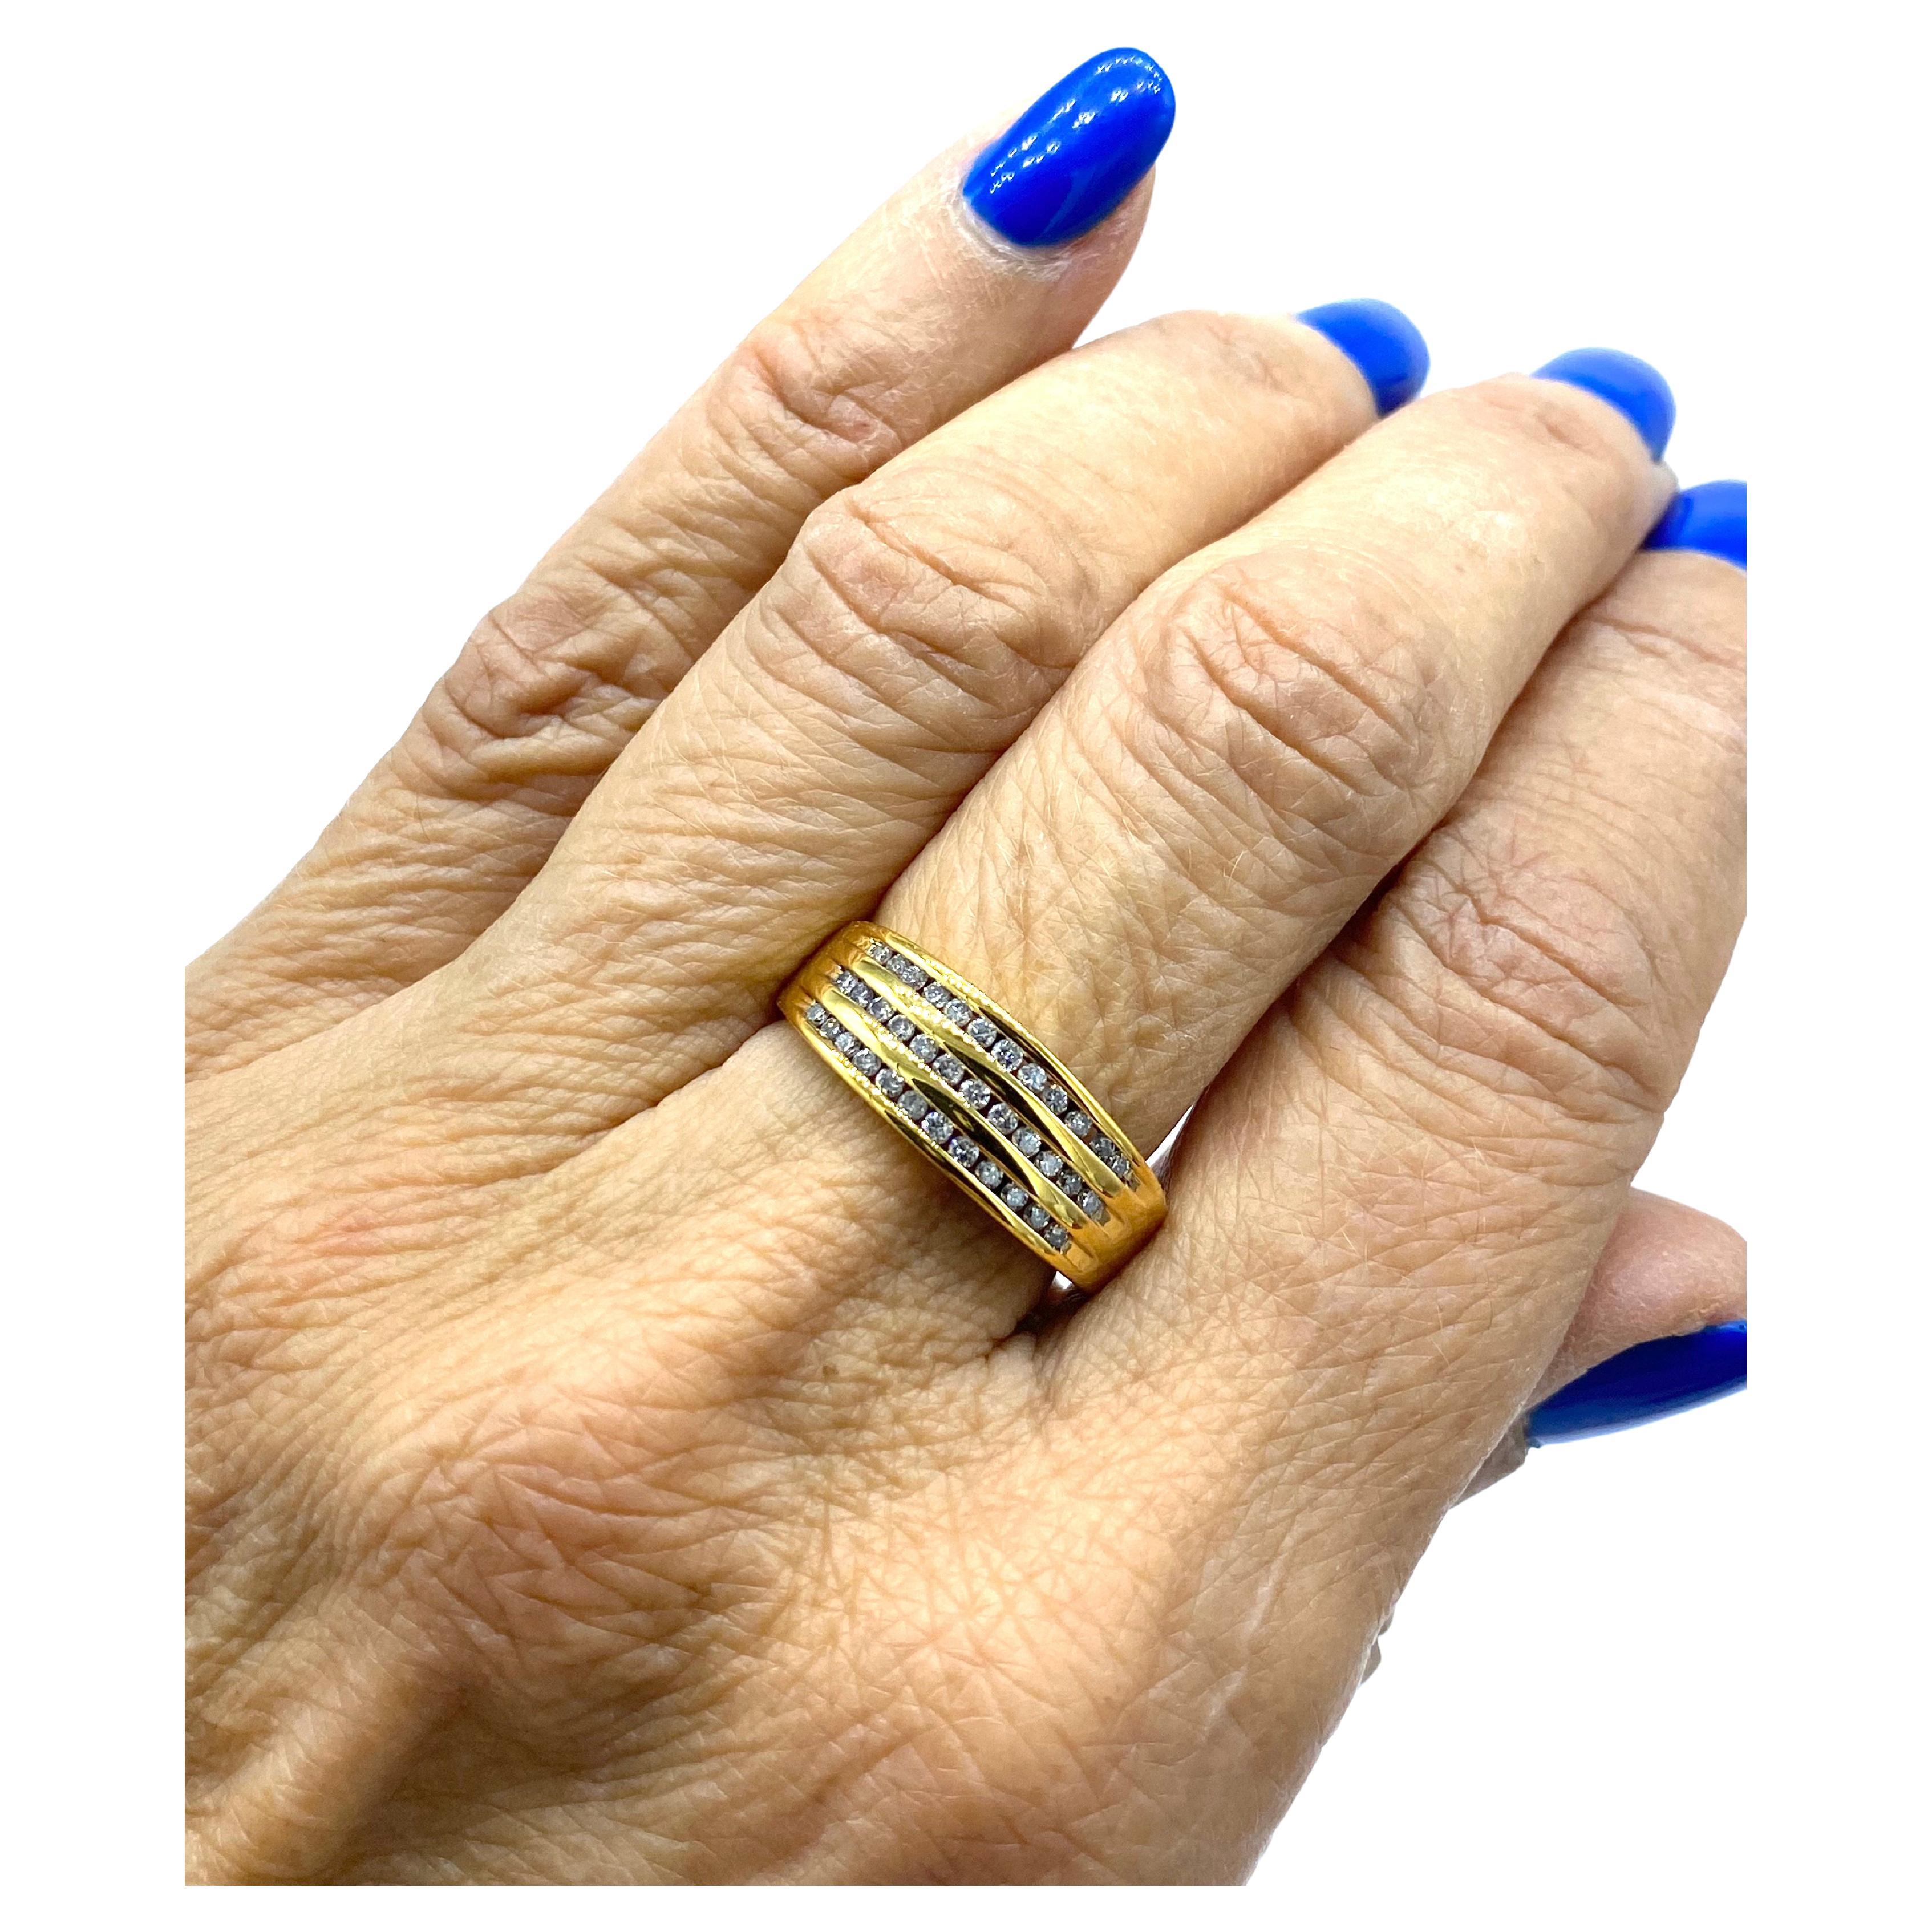 3 Row Channel Diamond Band Yellow Gold Ring
Unisex, the ring is a size 10.25
The diamonds are SI-2 clarity, and color is H
Diamond weight is .36 carat

 The ring width is 7.75 MM. Metal is 10 karat yellow gold
GIA Gemologist inspected & evaluated